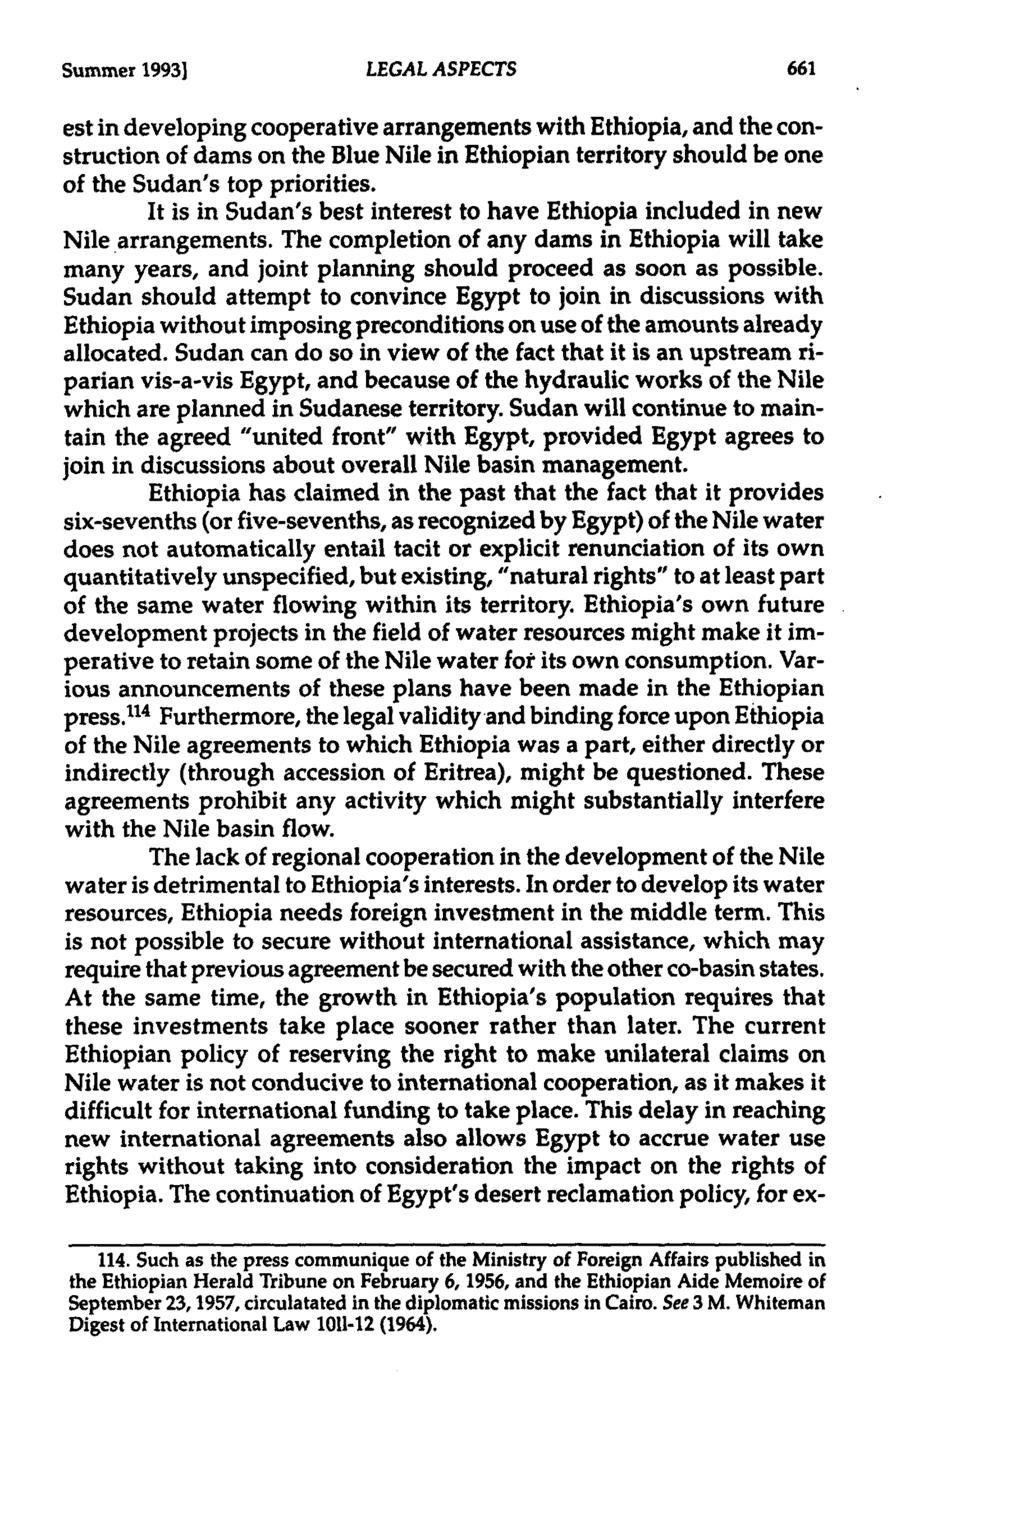 Summer 1993) est in developing cooperative arrangements with Ethiopia, and the construction of dams on the Blue Nile in Ethiopian territory should be one of the Sudan's top priorities.